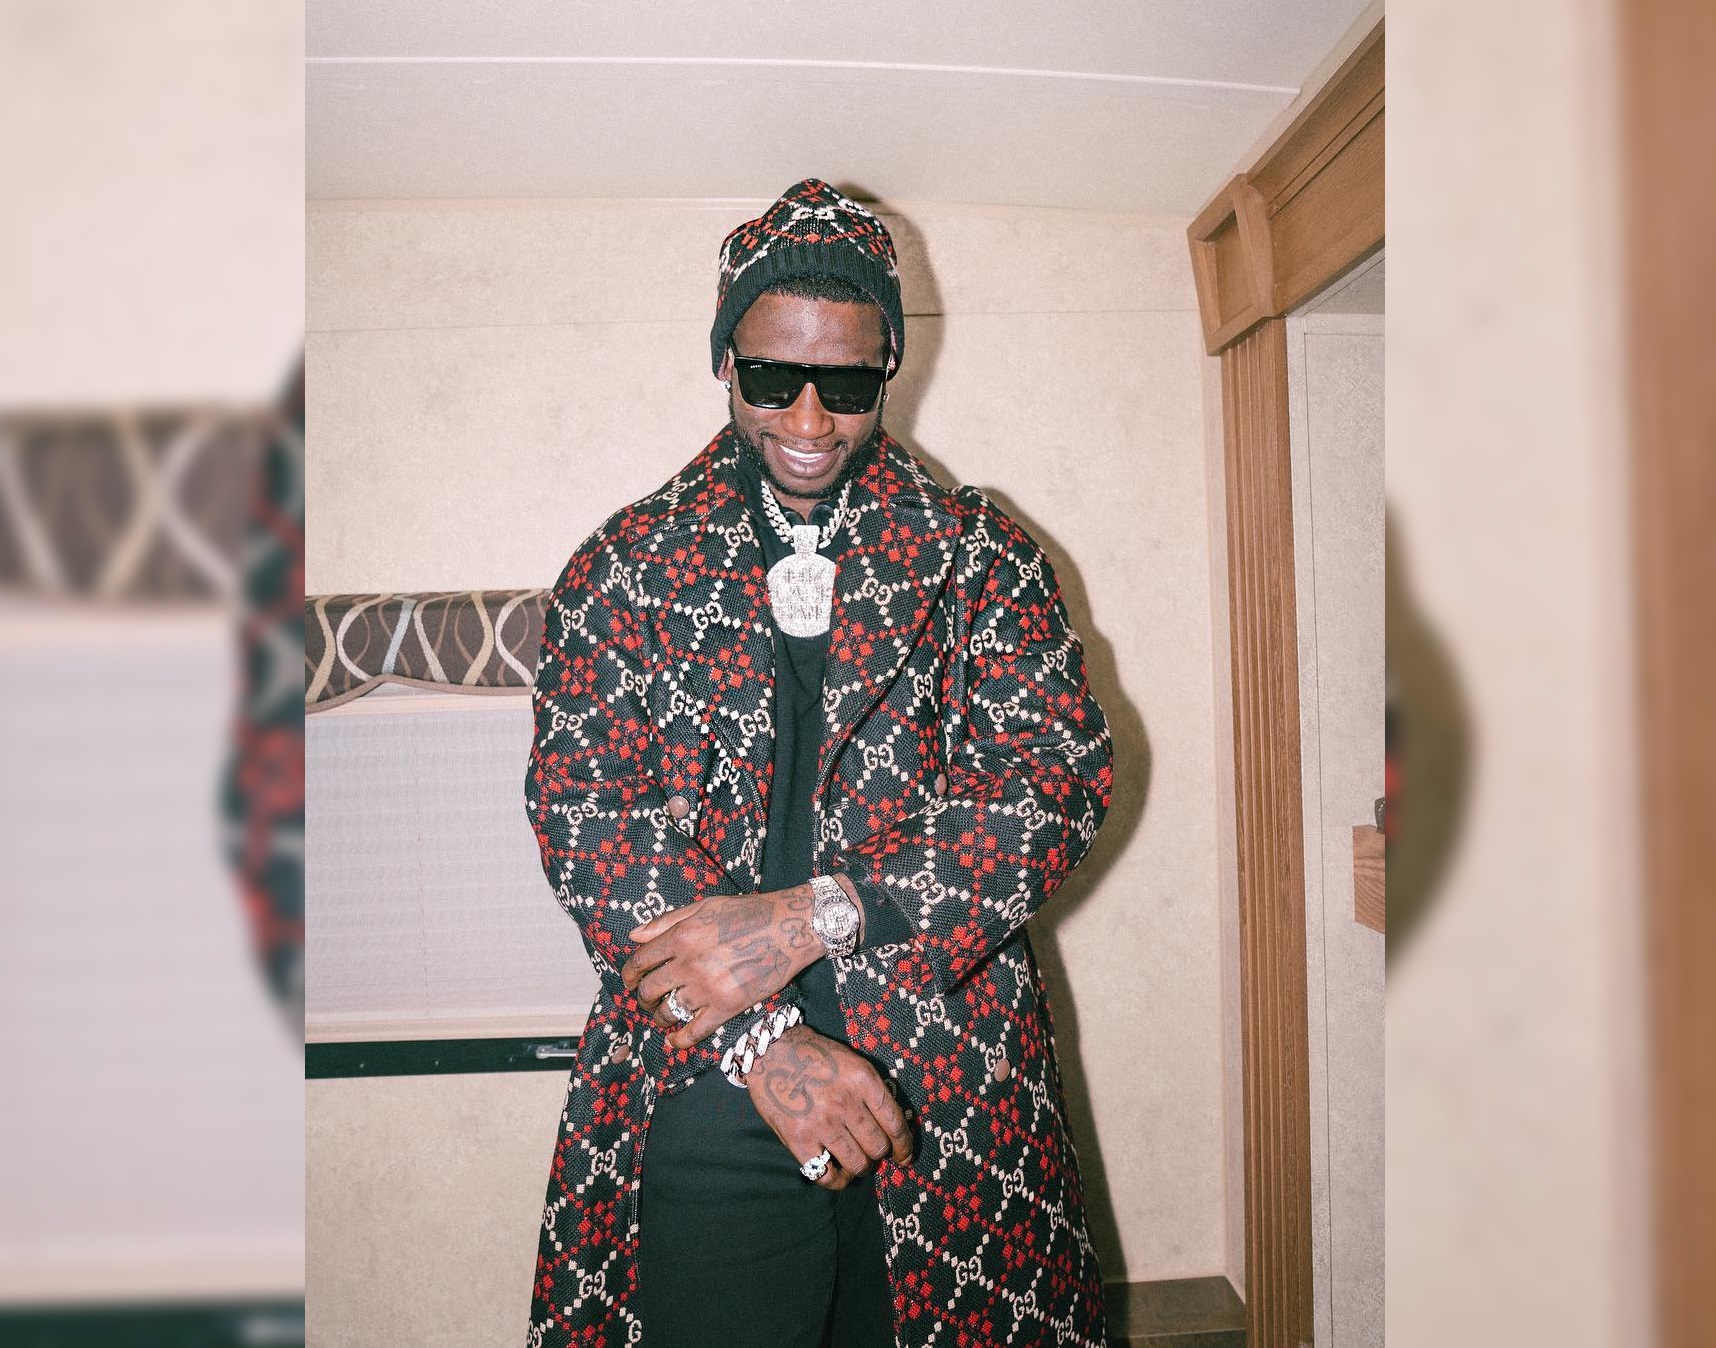 SPOTTED: Gucci Mane Covered in the Iconic GG Monogram